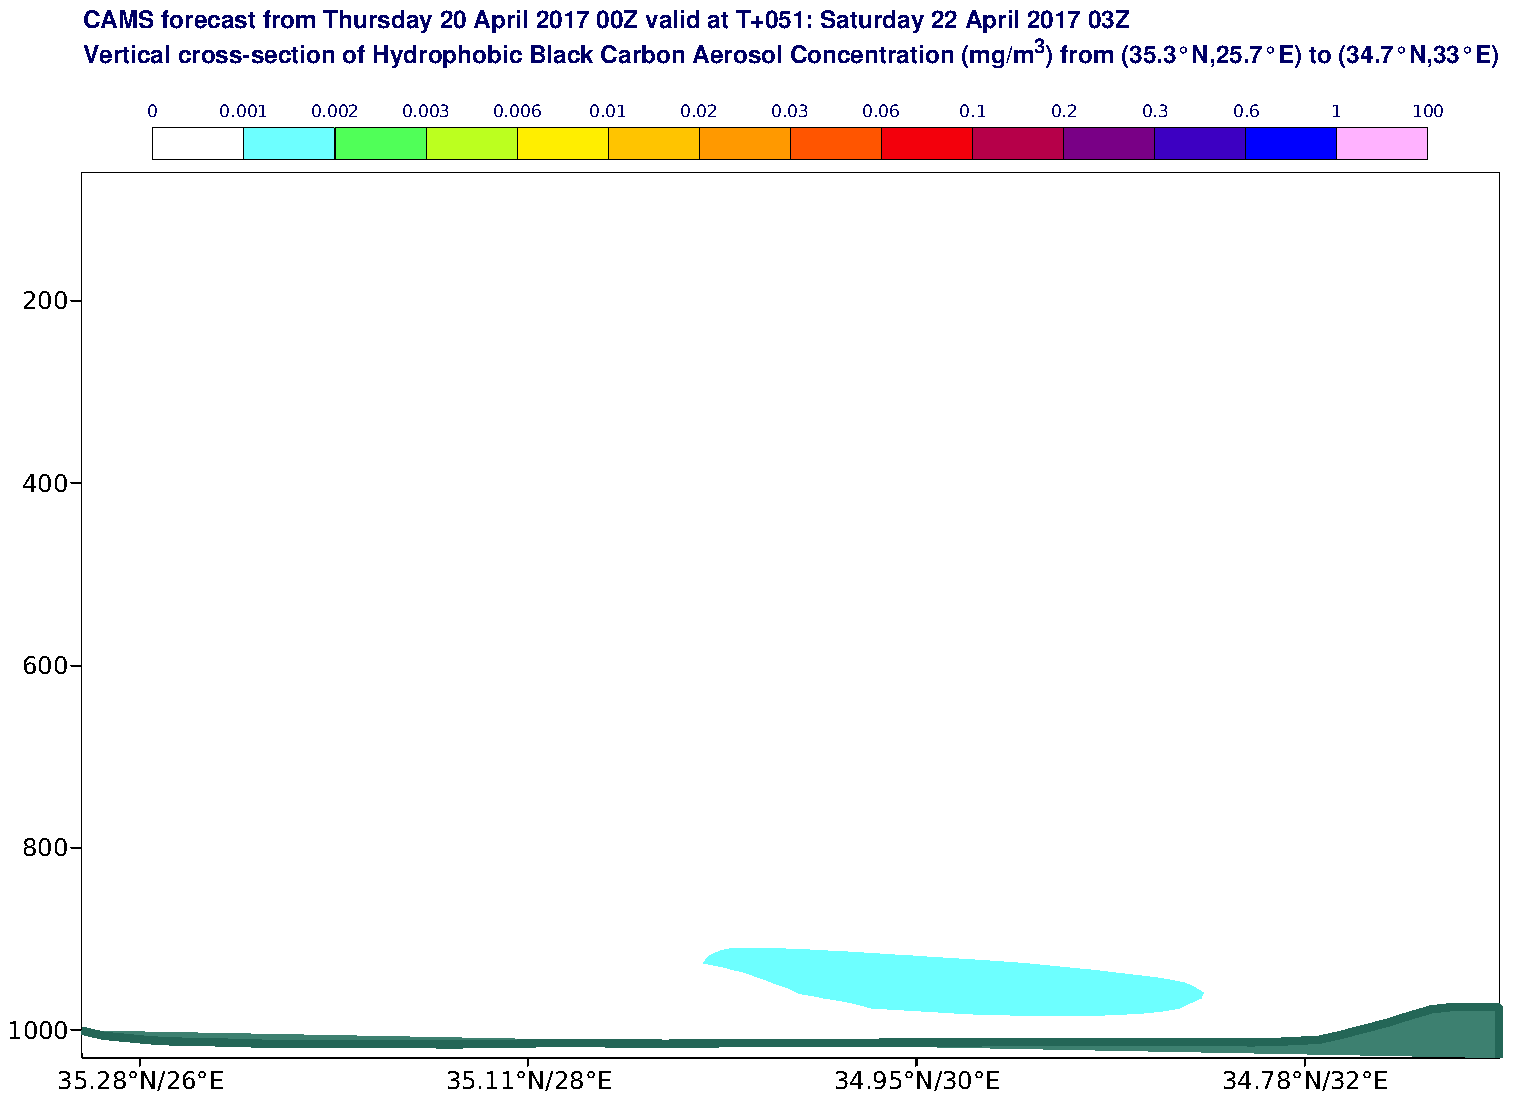 Vertical cross-section of Hydrophobic Black Carbon Aerosol Concentration (mg/m3) valid at T51 - 2017-04-22 03:00